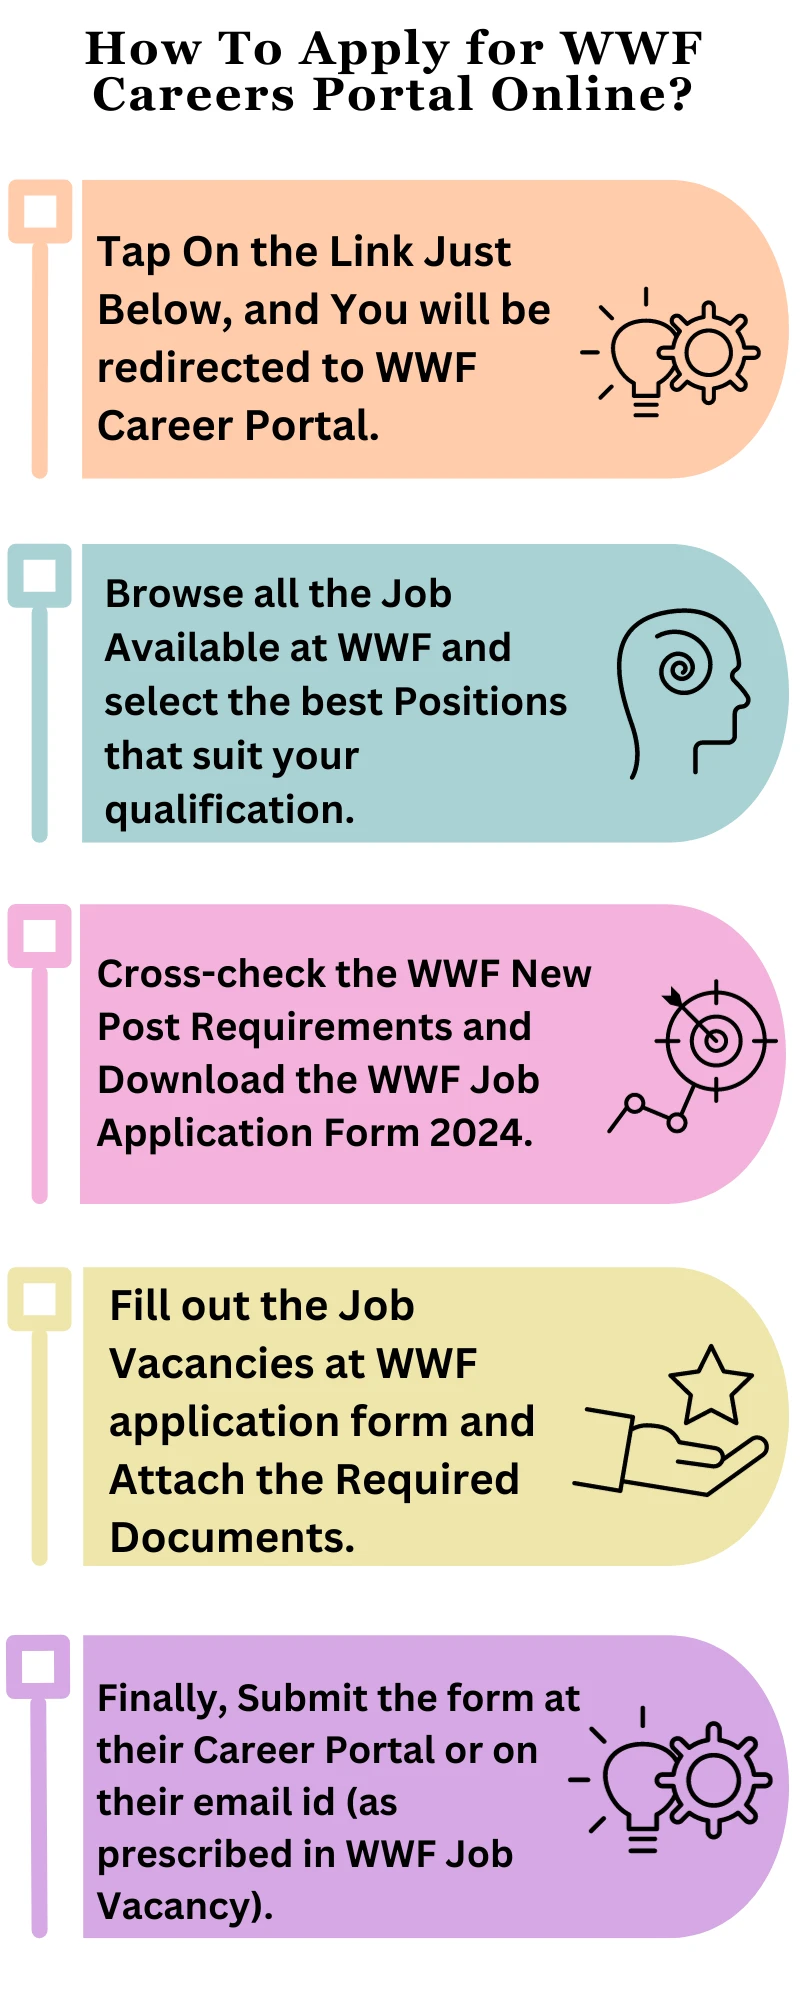 How To Apply for WWF Careers Portal Online?